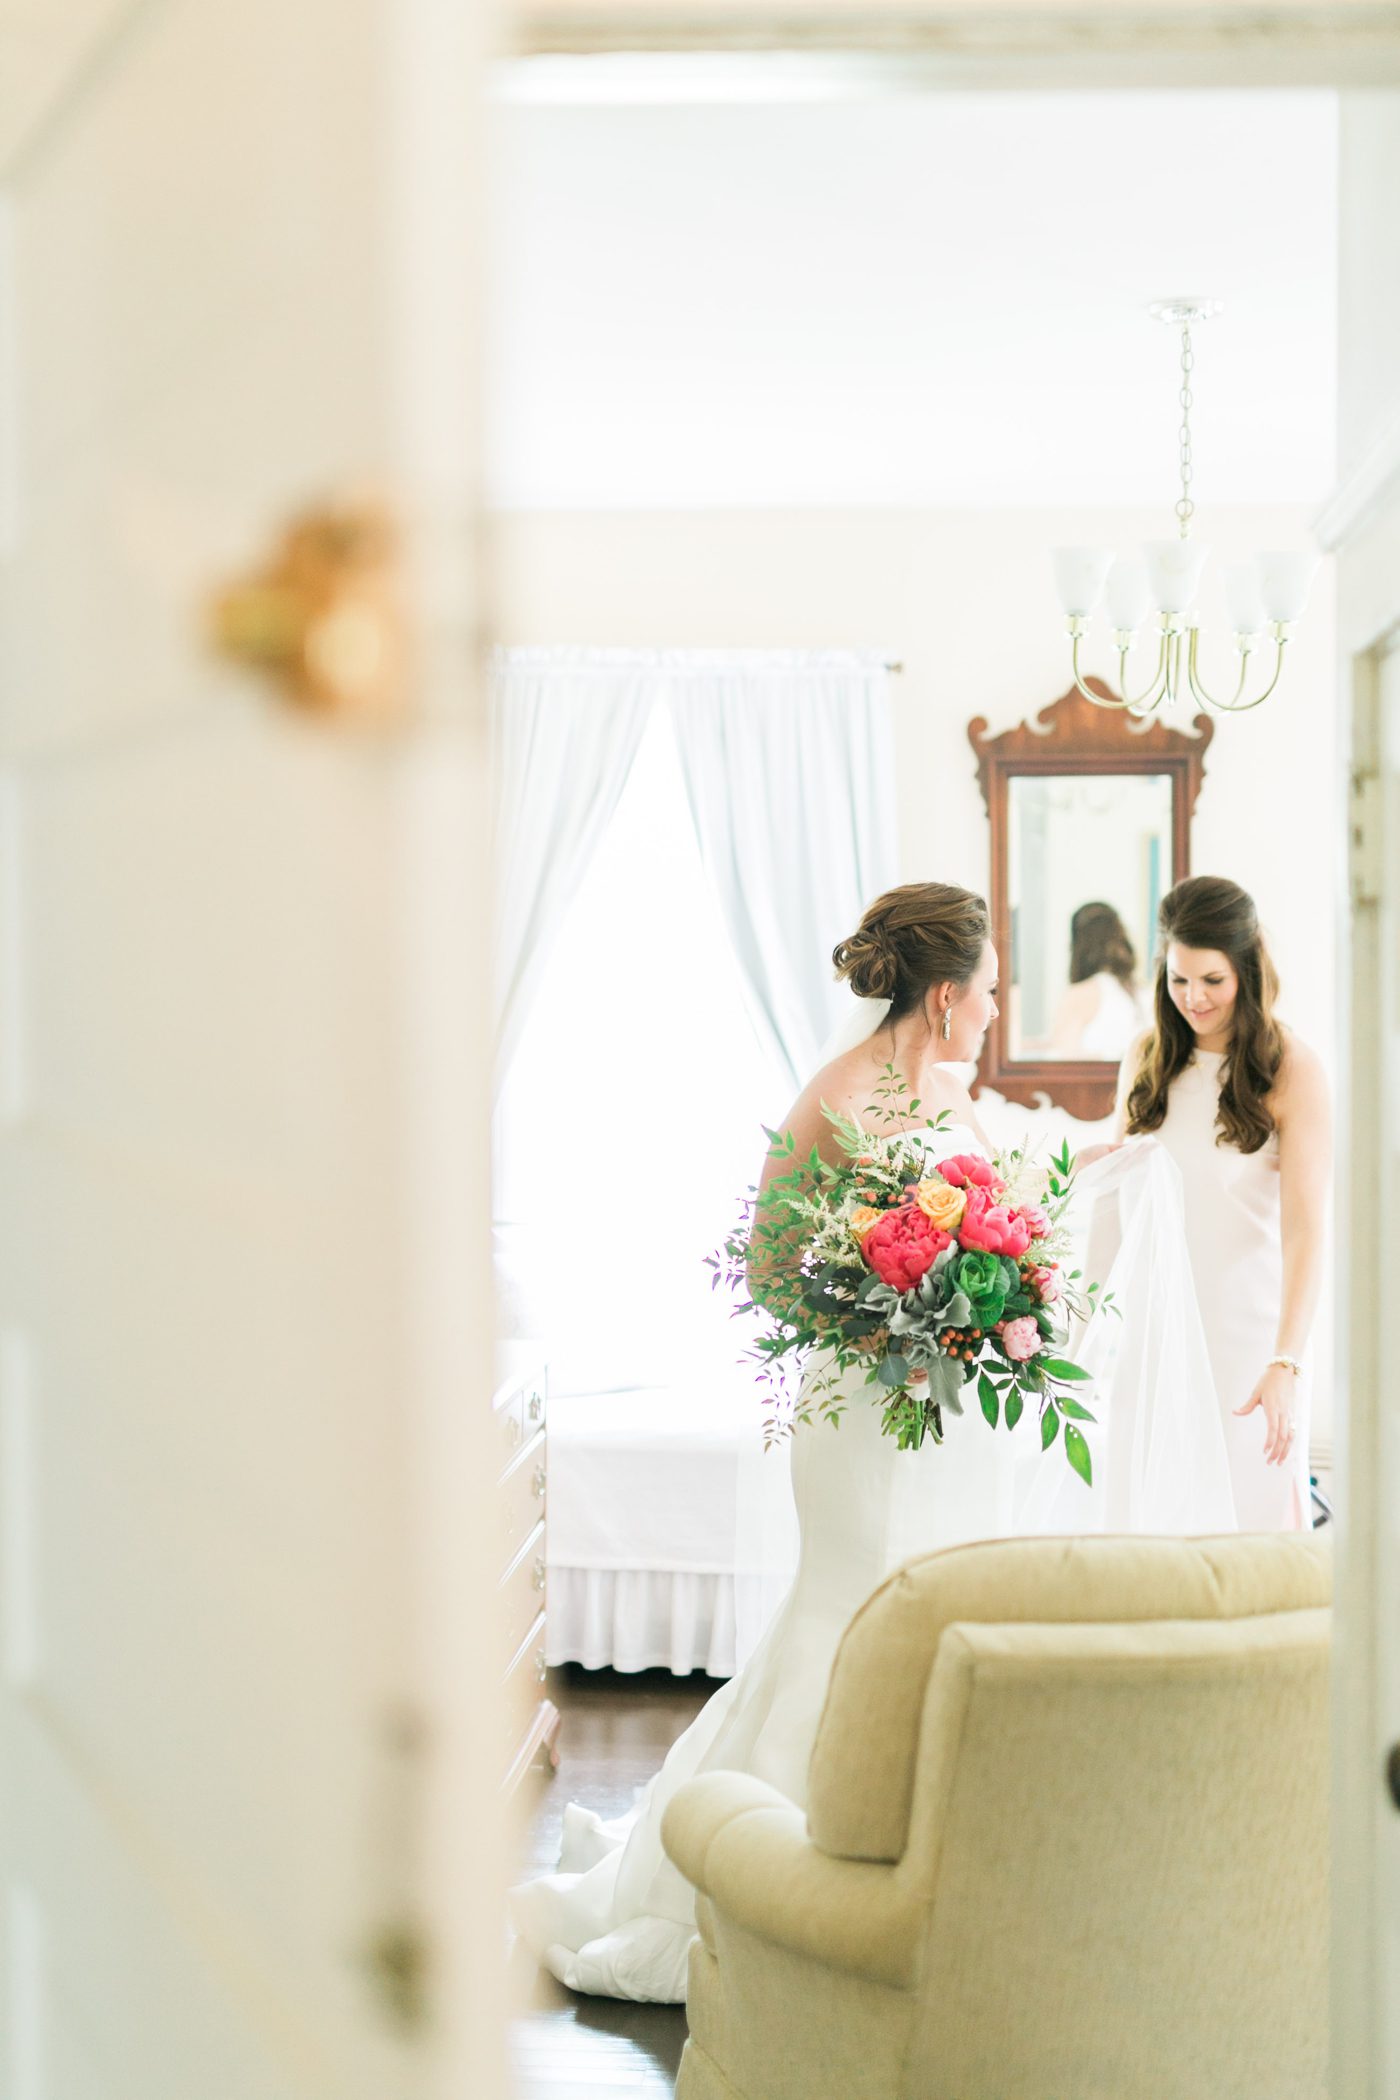 Candid photo of bridesmaid helping the bride get ready. Photo by Charleston wedding photographer Catherine Ann Photography